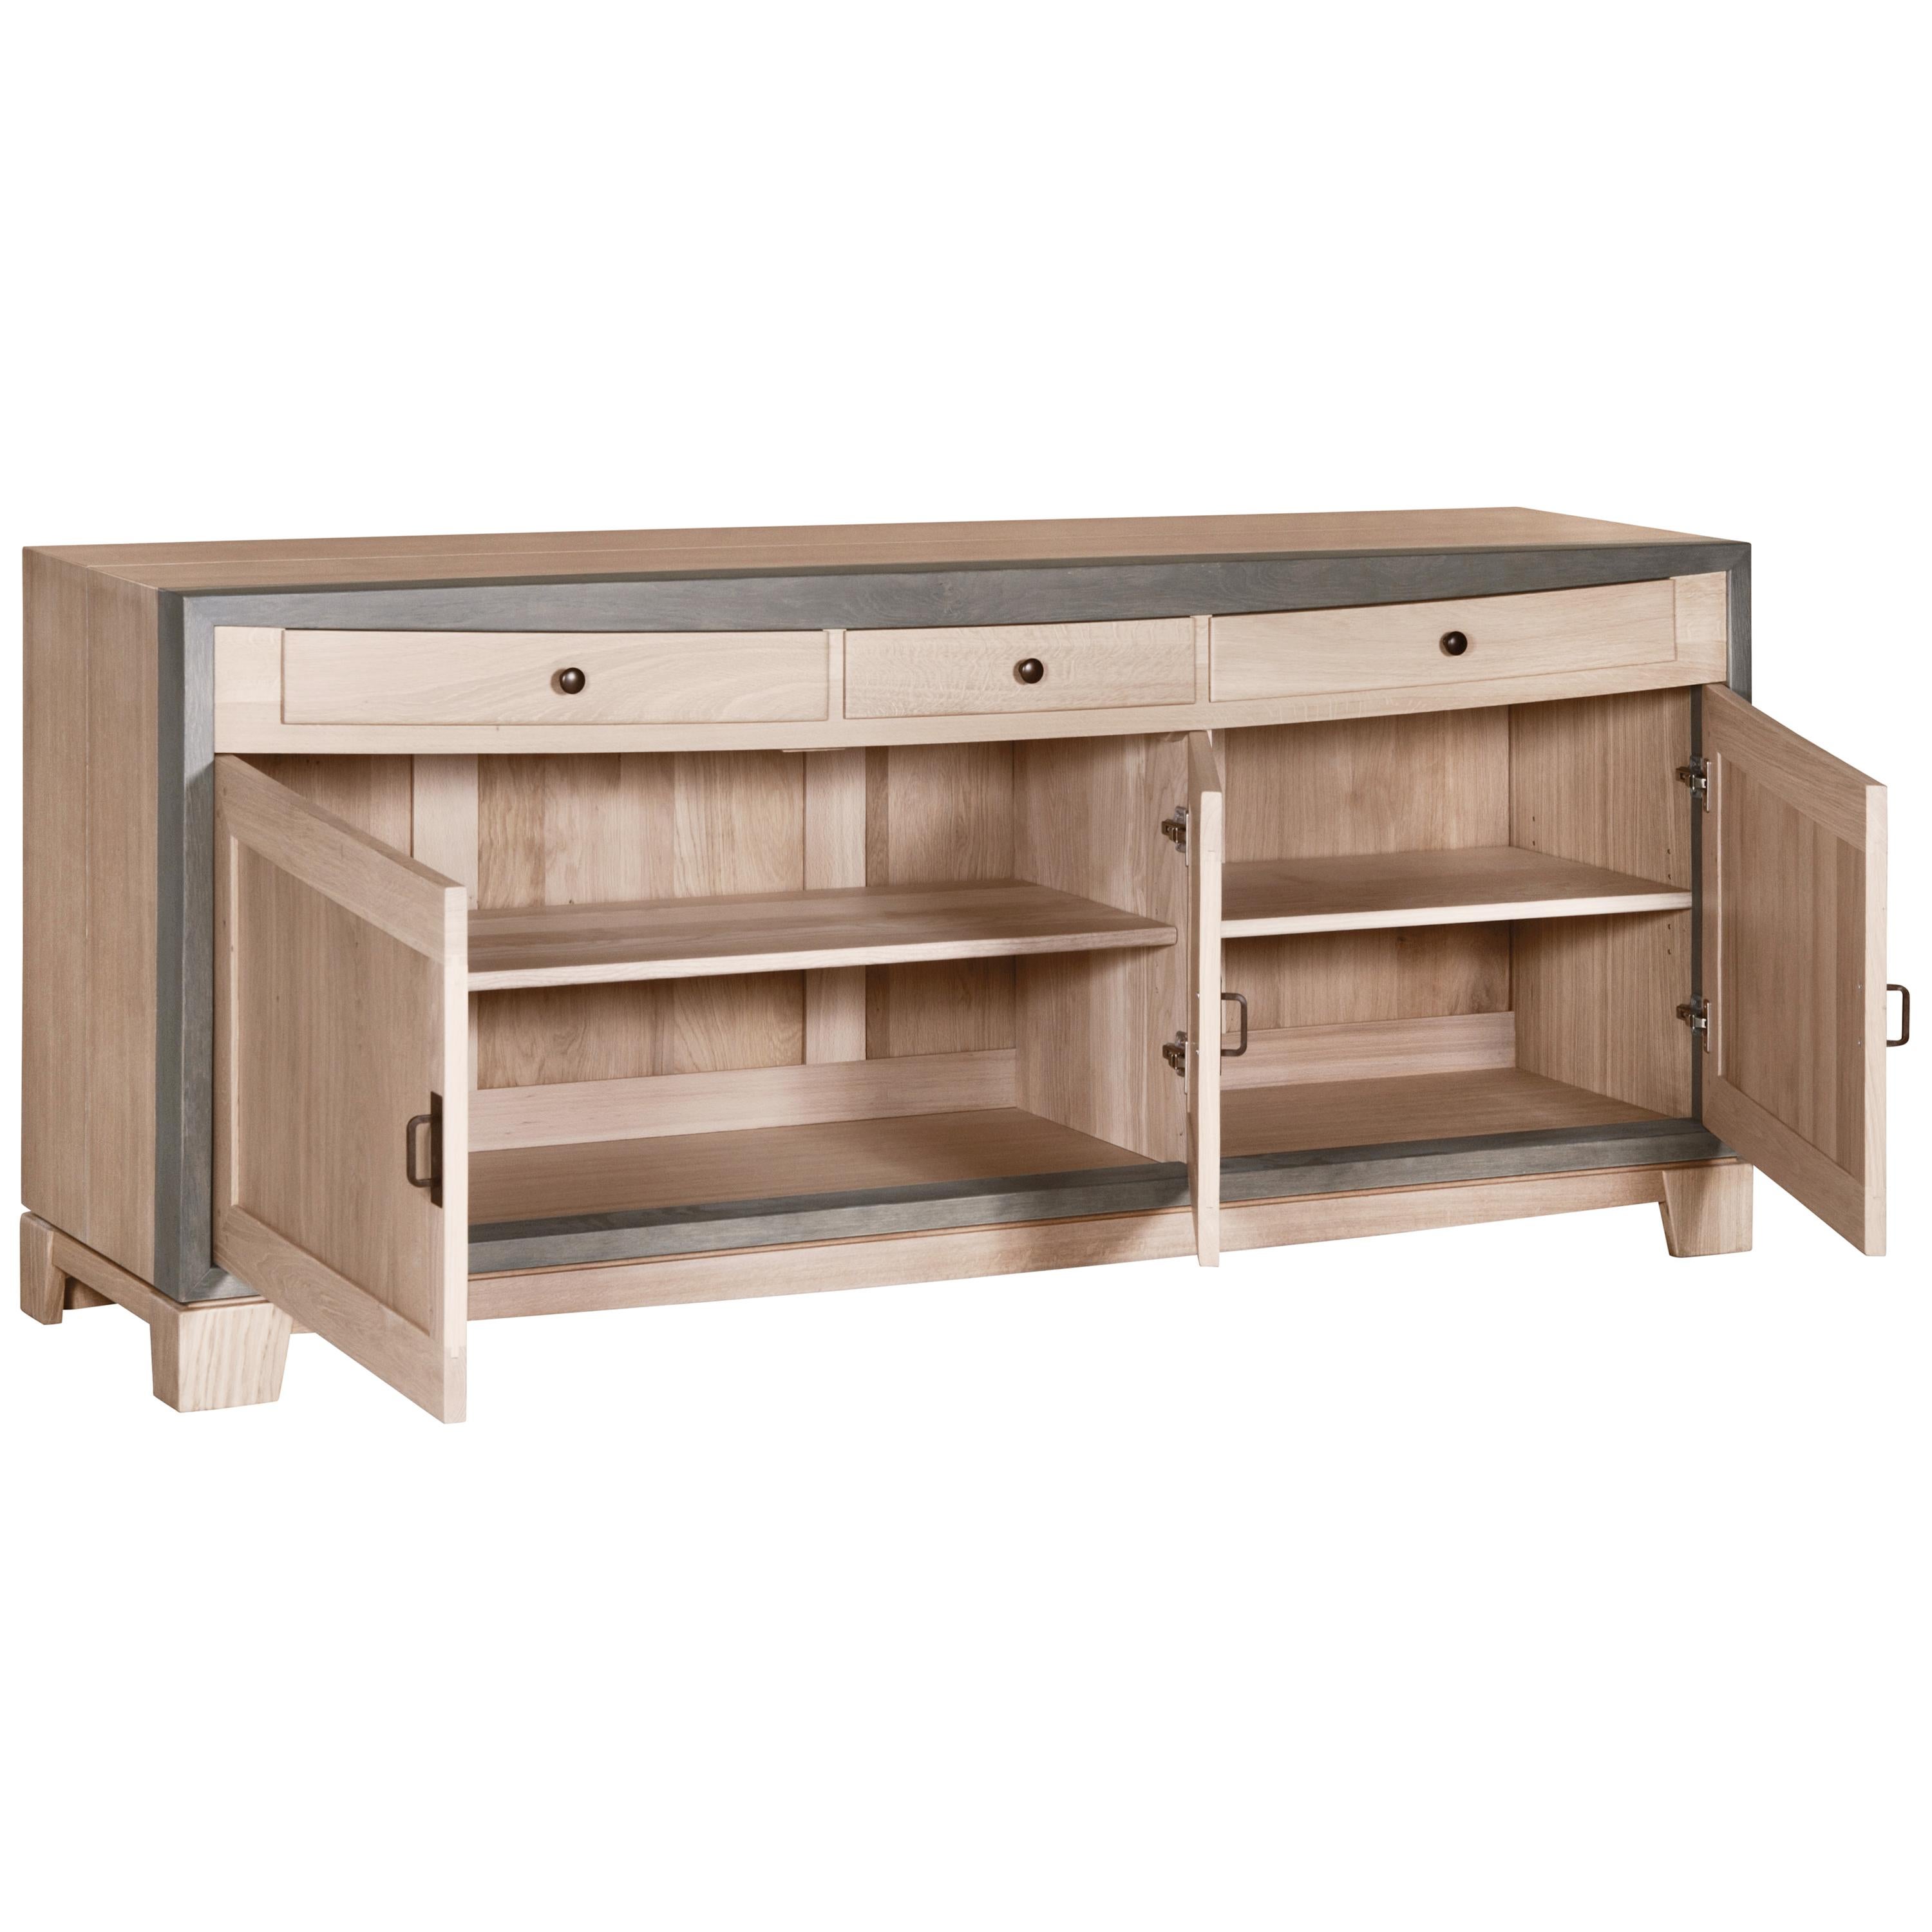 This 3-door sideboard belongs to the SIENNA collection and was created by the French designer Christophe Lecomte. Christophe uses oak, as a French noble wood to enforce the feeling of durability and timeless lines of this collection. The straight